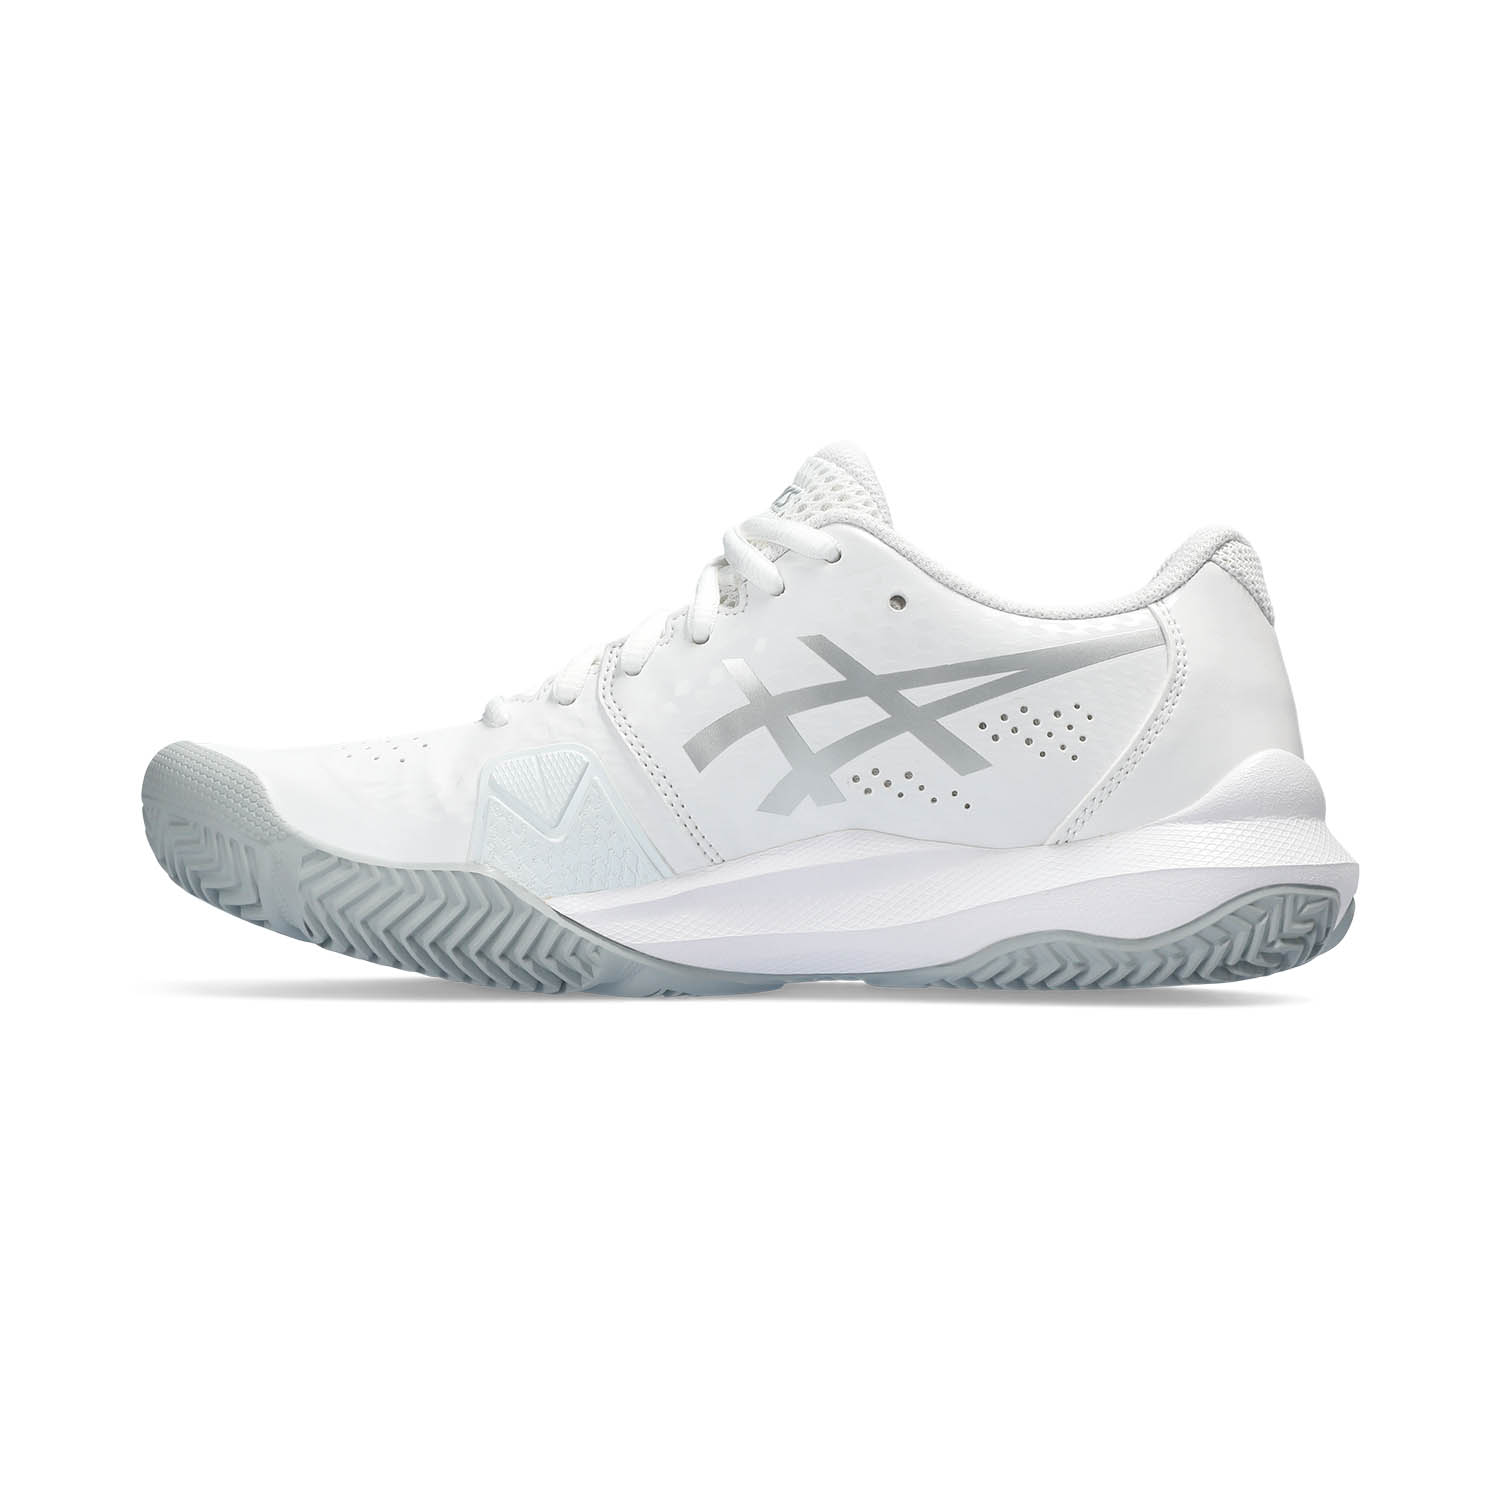 Asics Gel Challenger 14 Padel - White/Pure Silver